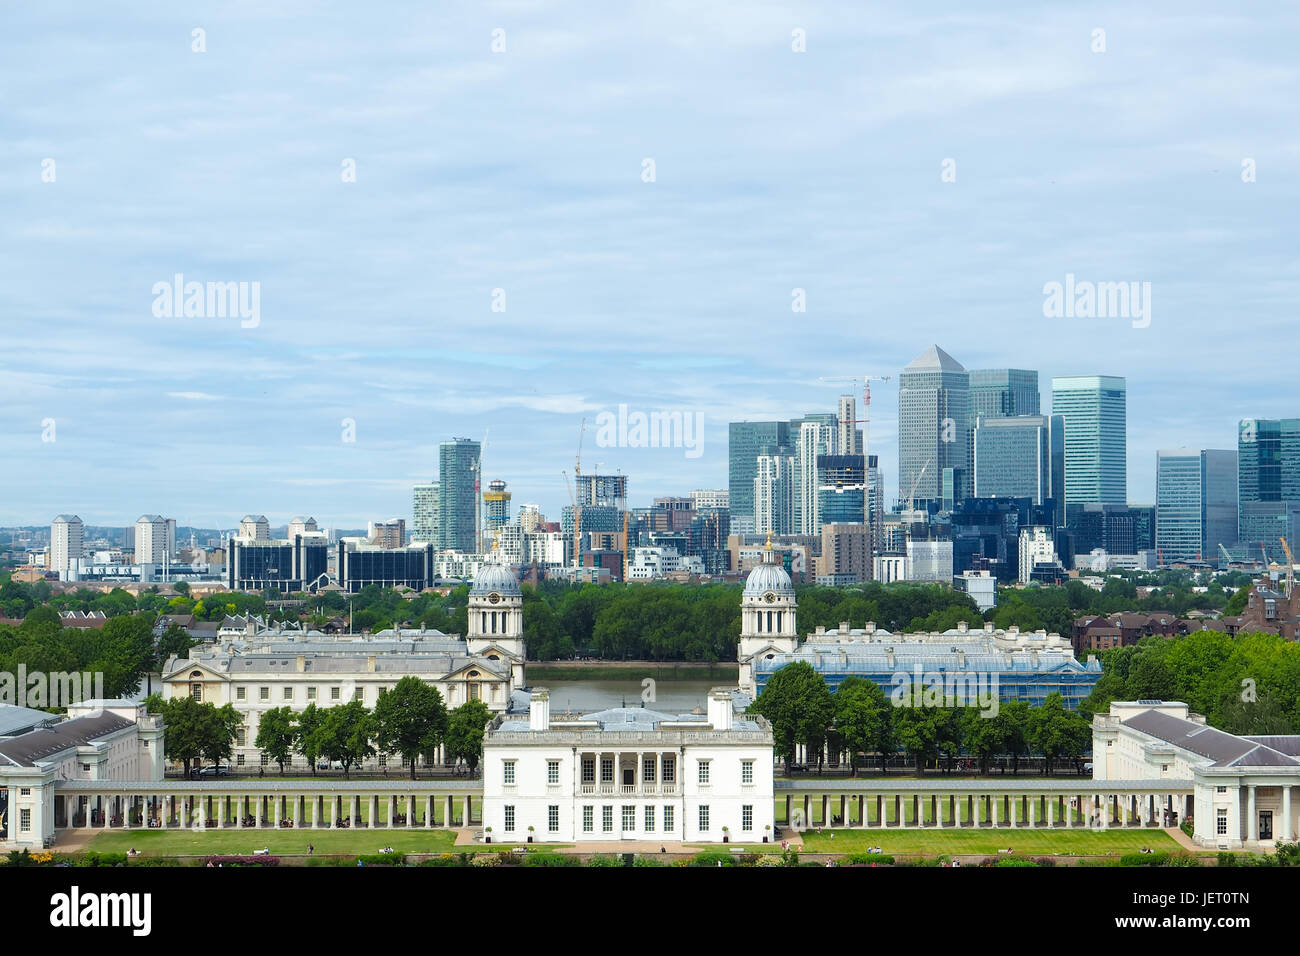 View of Royal chapel, Painted hall and classic colonnade in Greenwich park, London, and skyscrapers of Canary Wharf in the distance seen from the Gree Stock Photo